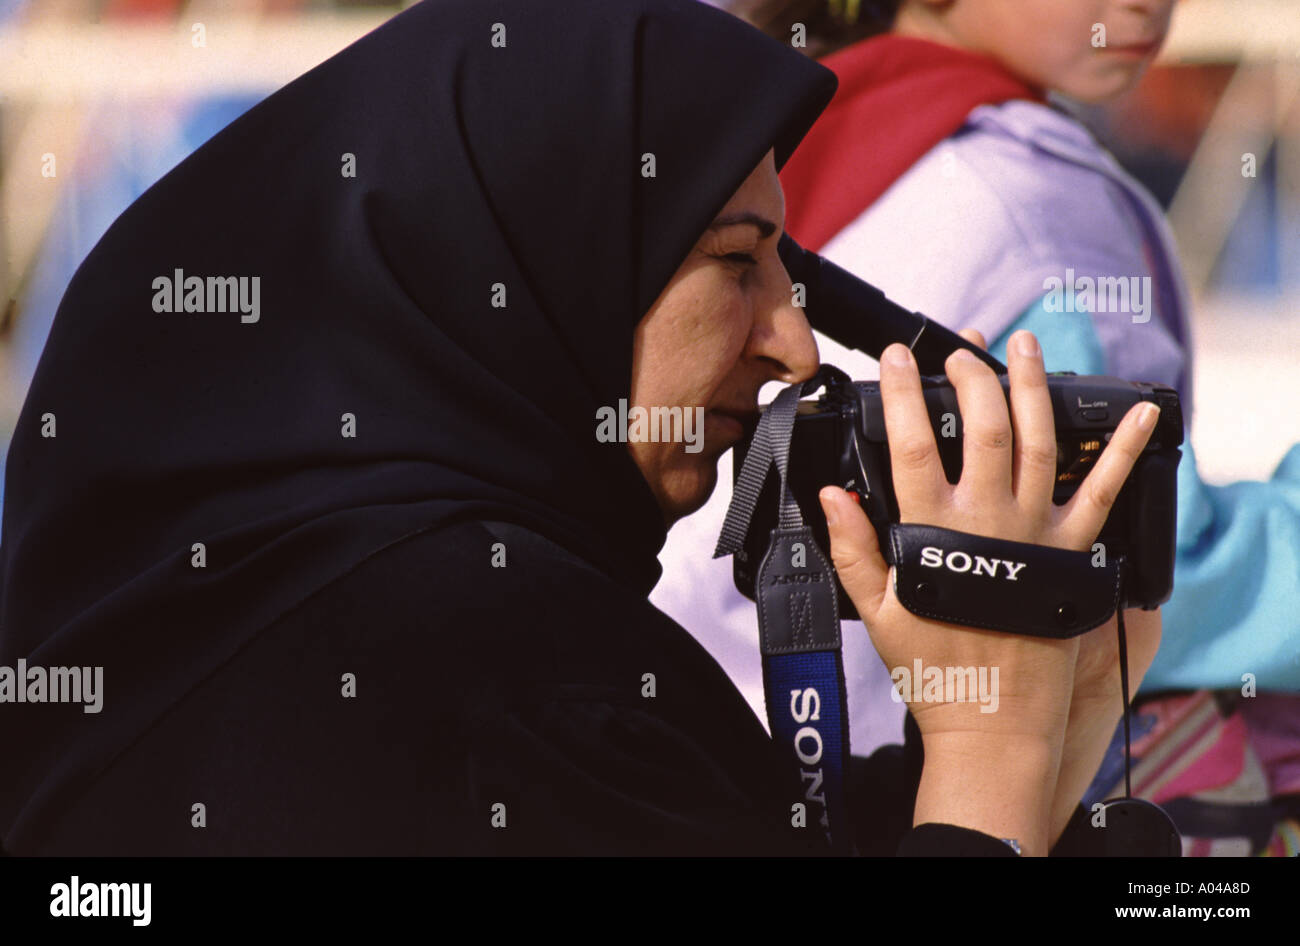 Muslim woman filming with video camera Stock Photo